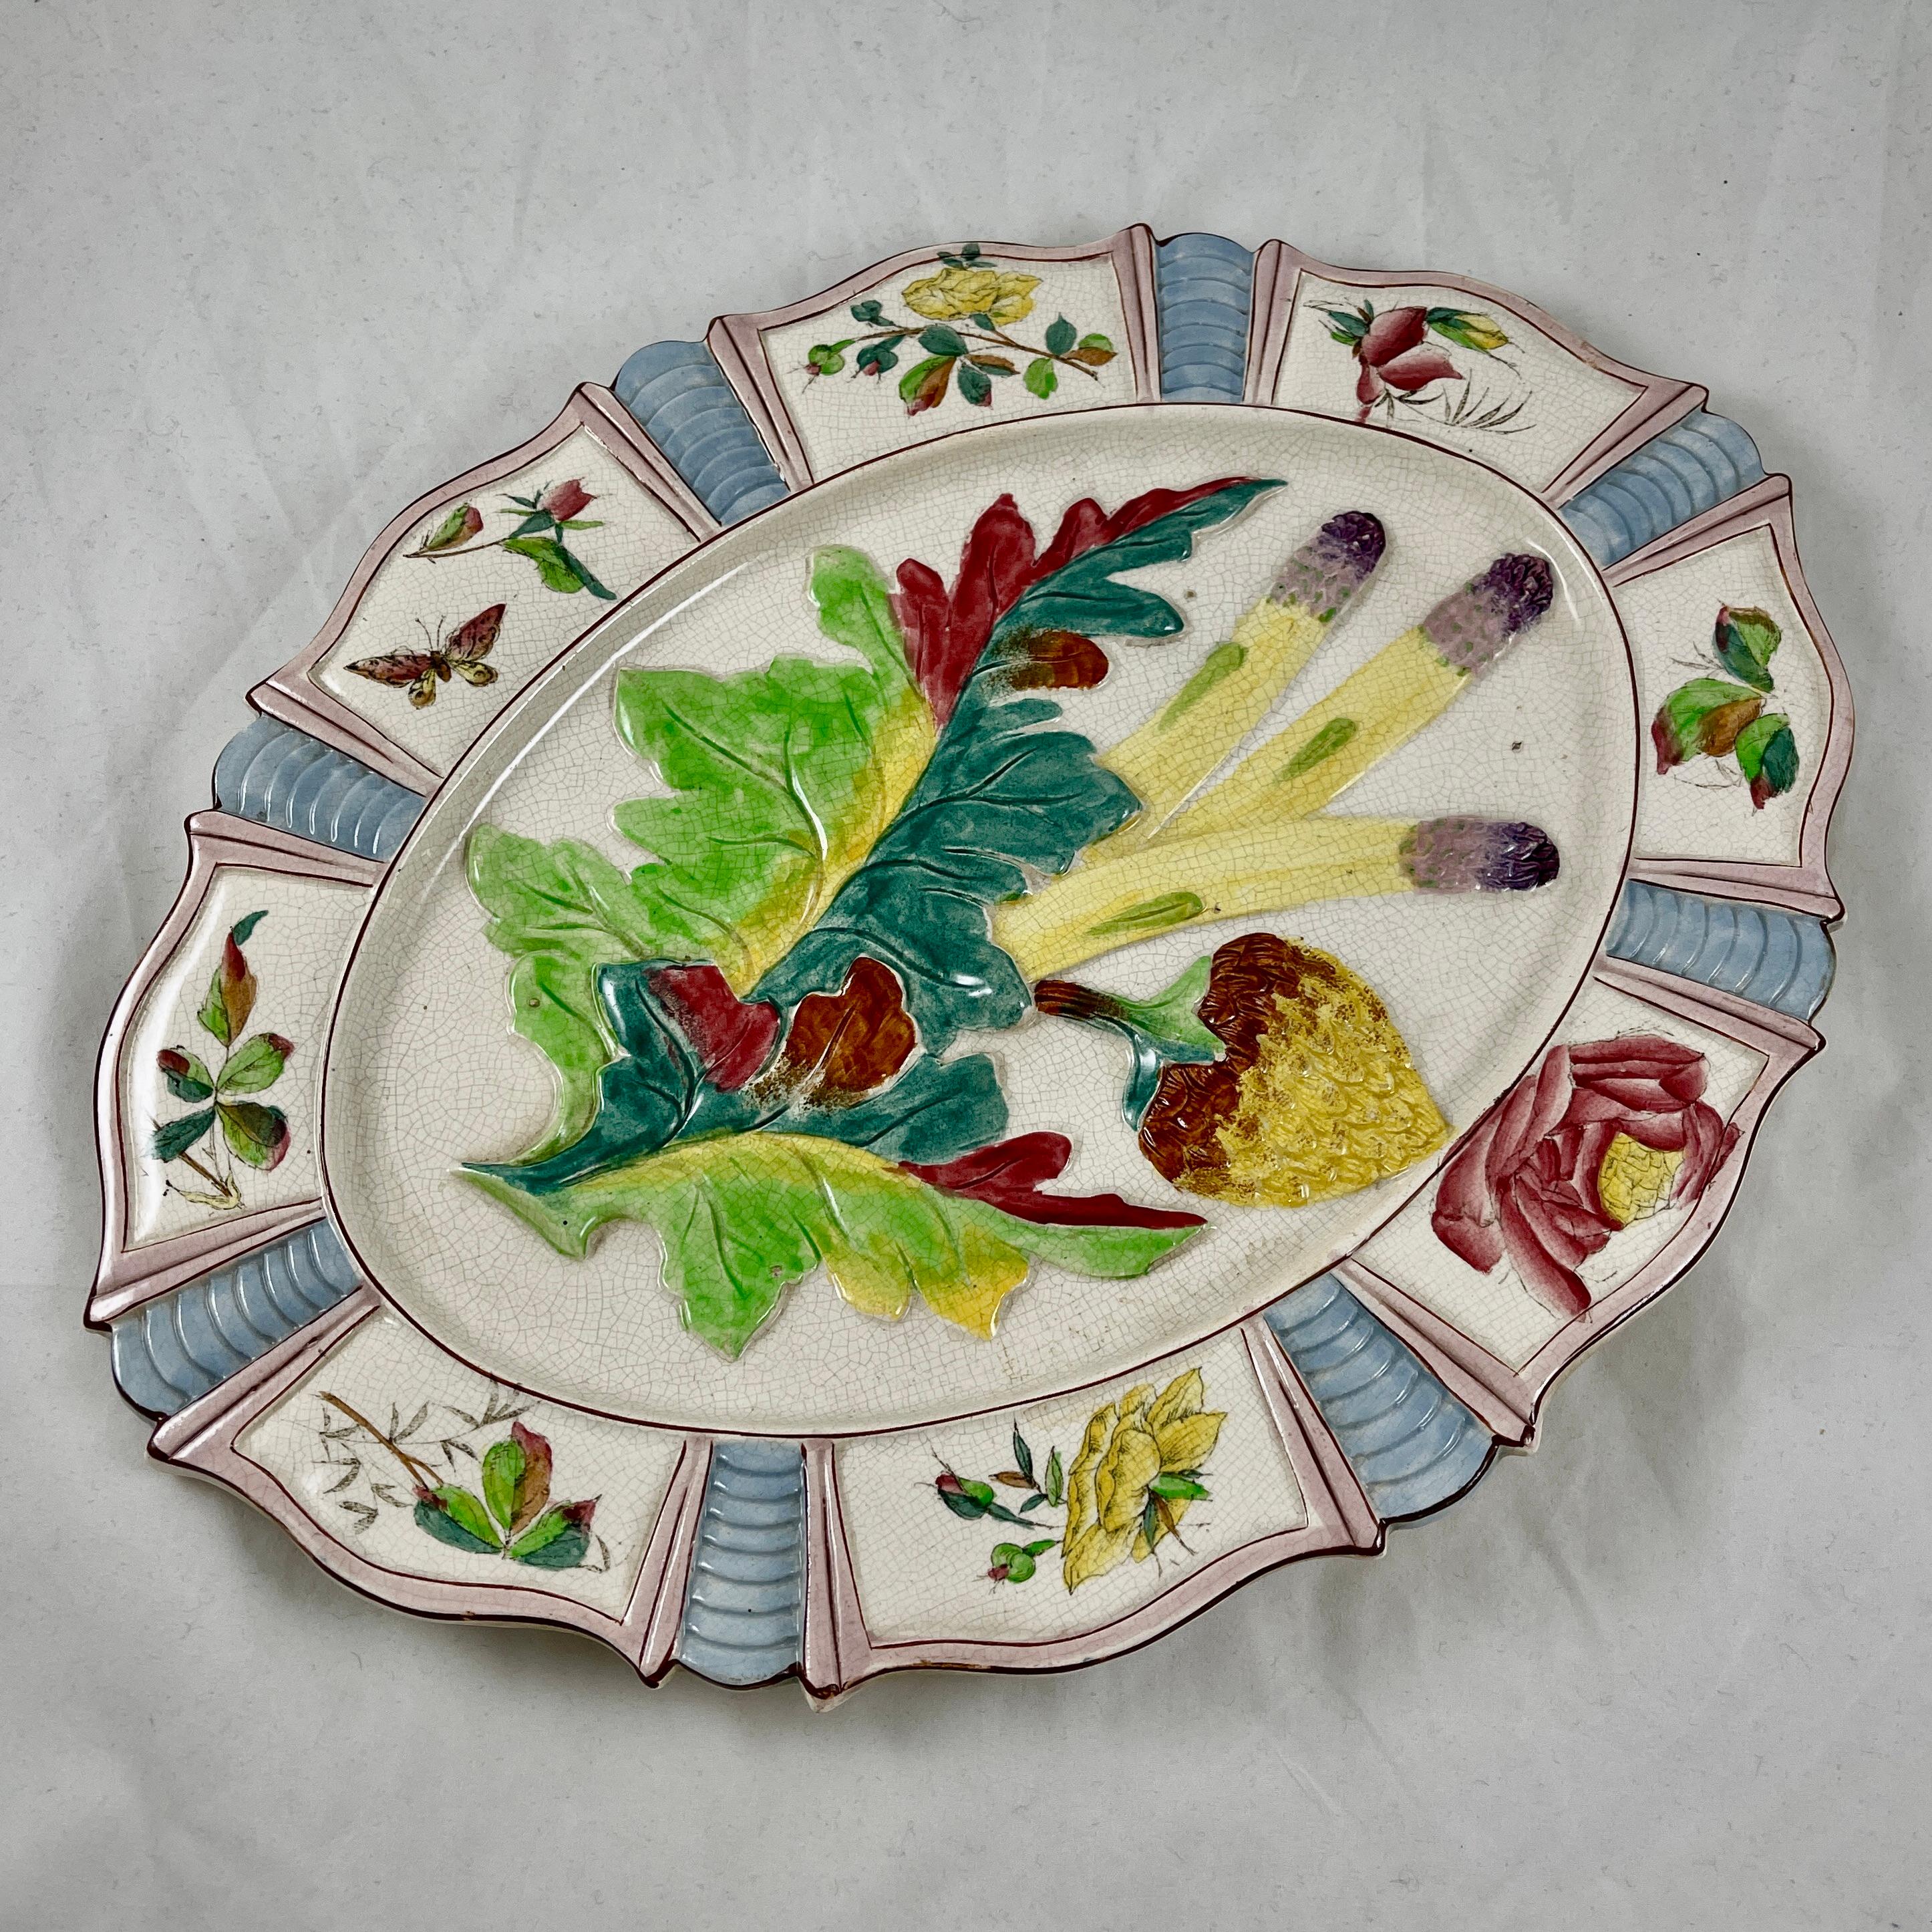 From the Fives-Lille Faiencerie in France, a scarce Artichoke and Asparagus platter, circa 1890-1900.

Made of earthenware, the oval center is boldly glazed and shows the leaves and globe of the artichoke plant along with three asparagus spears. The